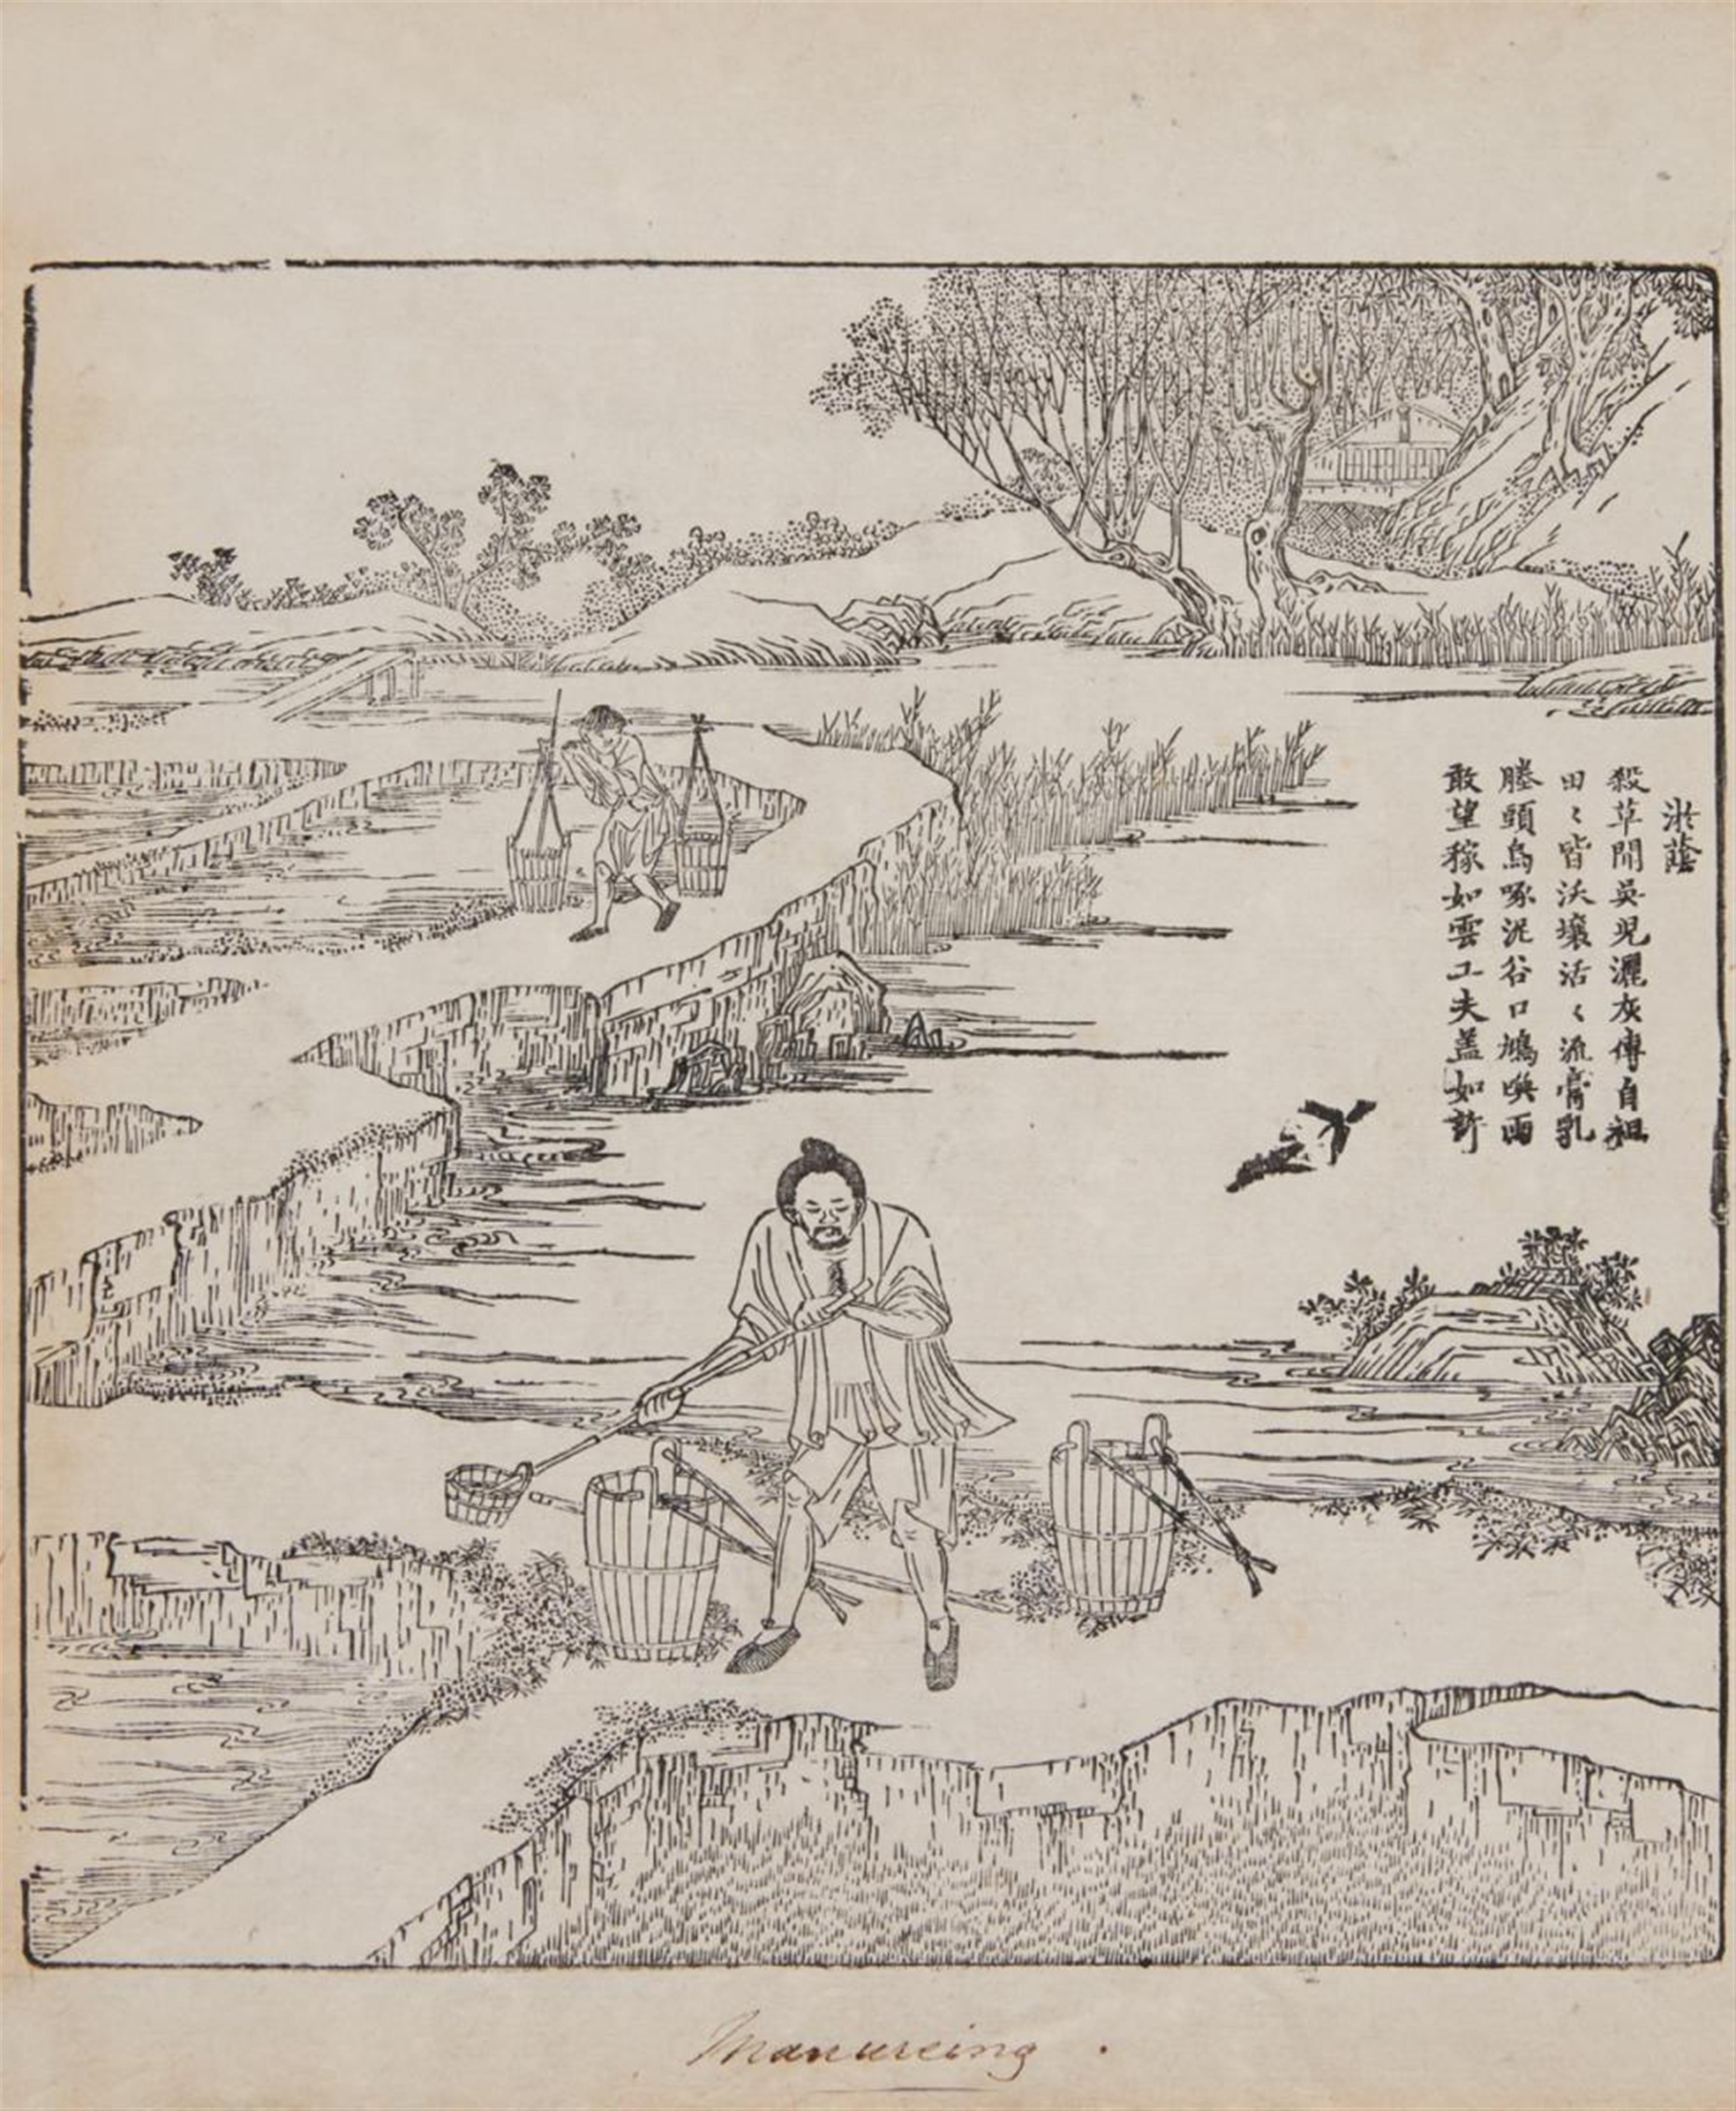 Jiao Bingzhen . Qing dynasty - The first volume of Gengzhi tu (Pictures of Tilling and Weaving) with illustrations of rice-planting activities yet without the imperial poems. European binding. Qing dynasty. - image-4